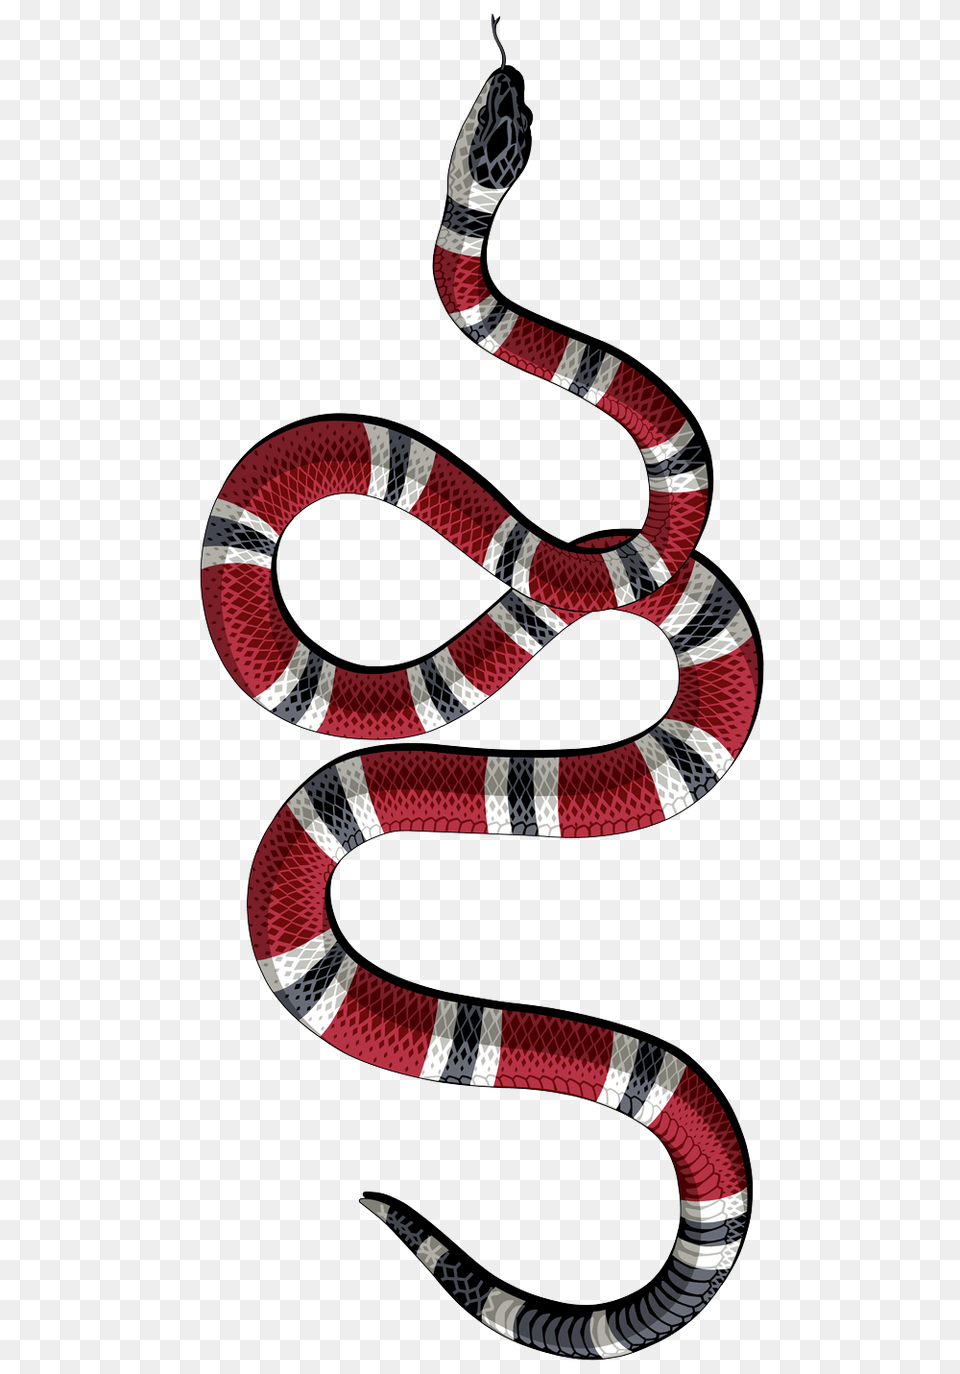 Decal Kingsnakes Gucci Sticker Serpent Gucci Decal On Car, Animal, King Snake, Reptile, Snake Free Transparent Png